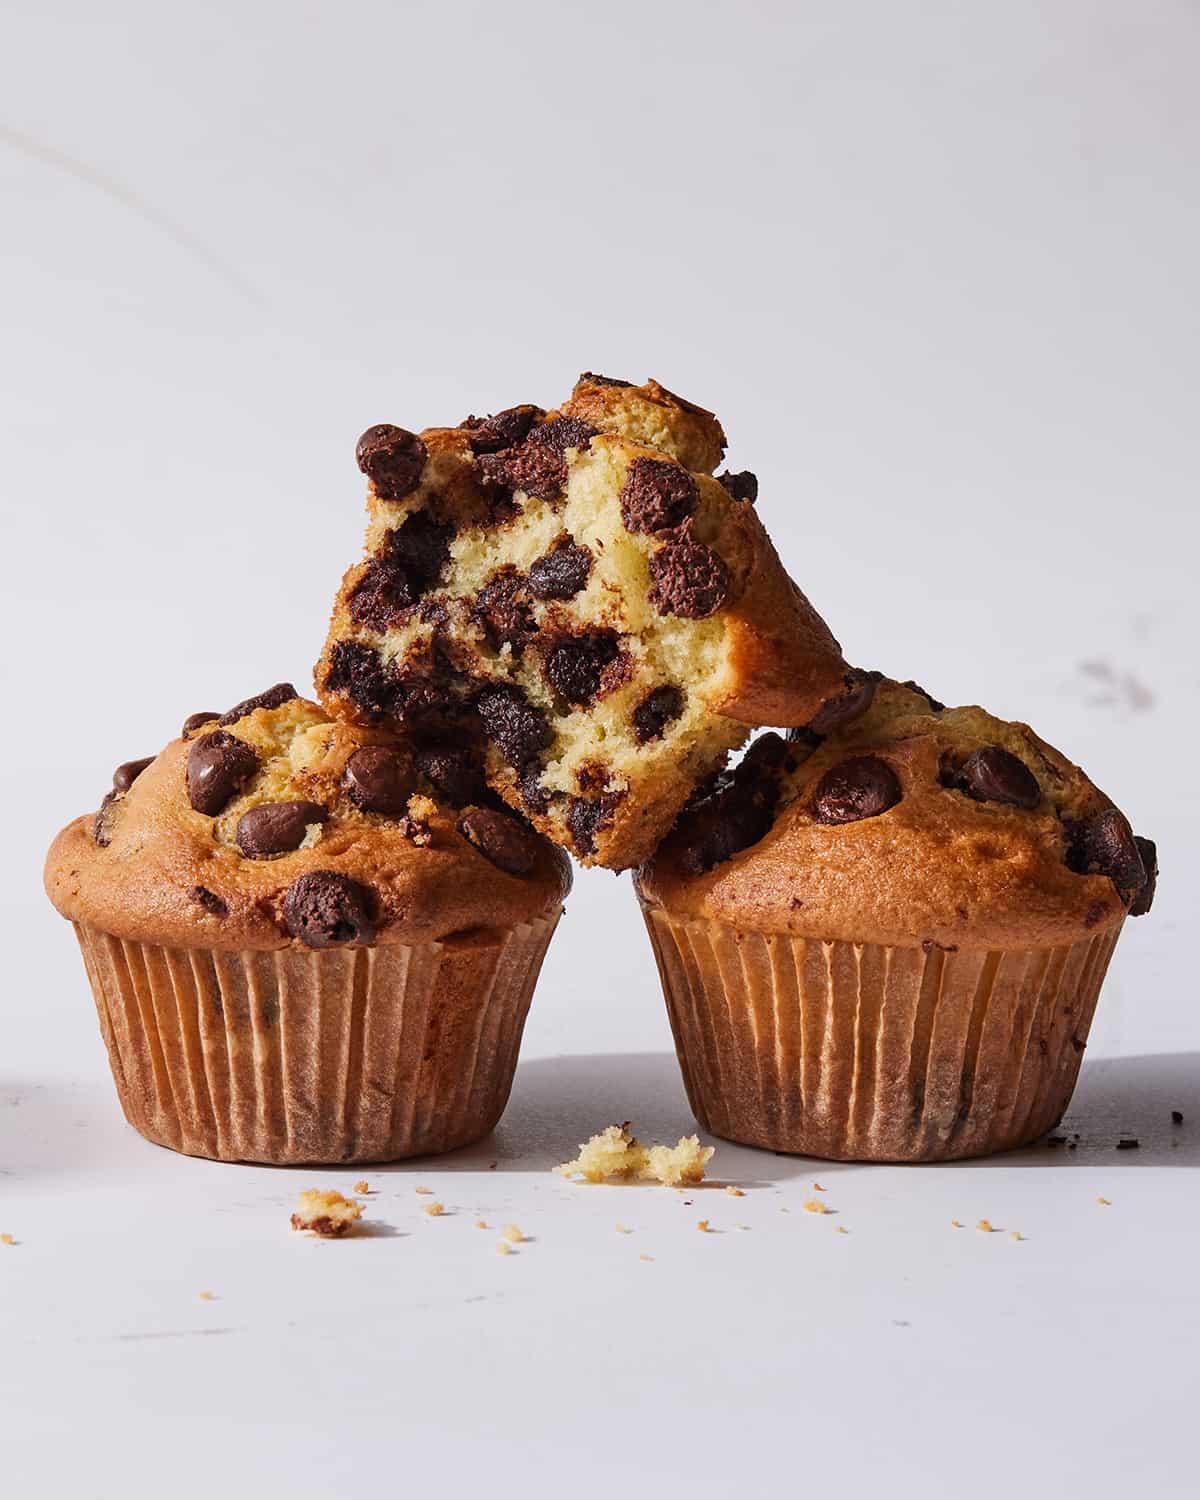 A stack of 3 chocolate chip muffins.  One of the muffins is cut in half to see the inside.  